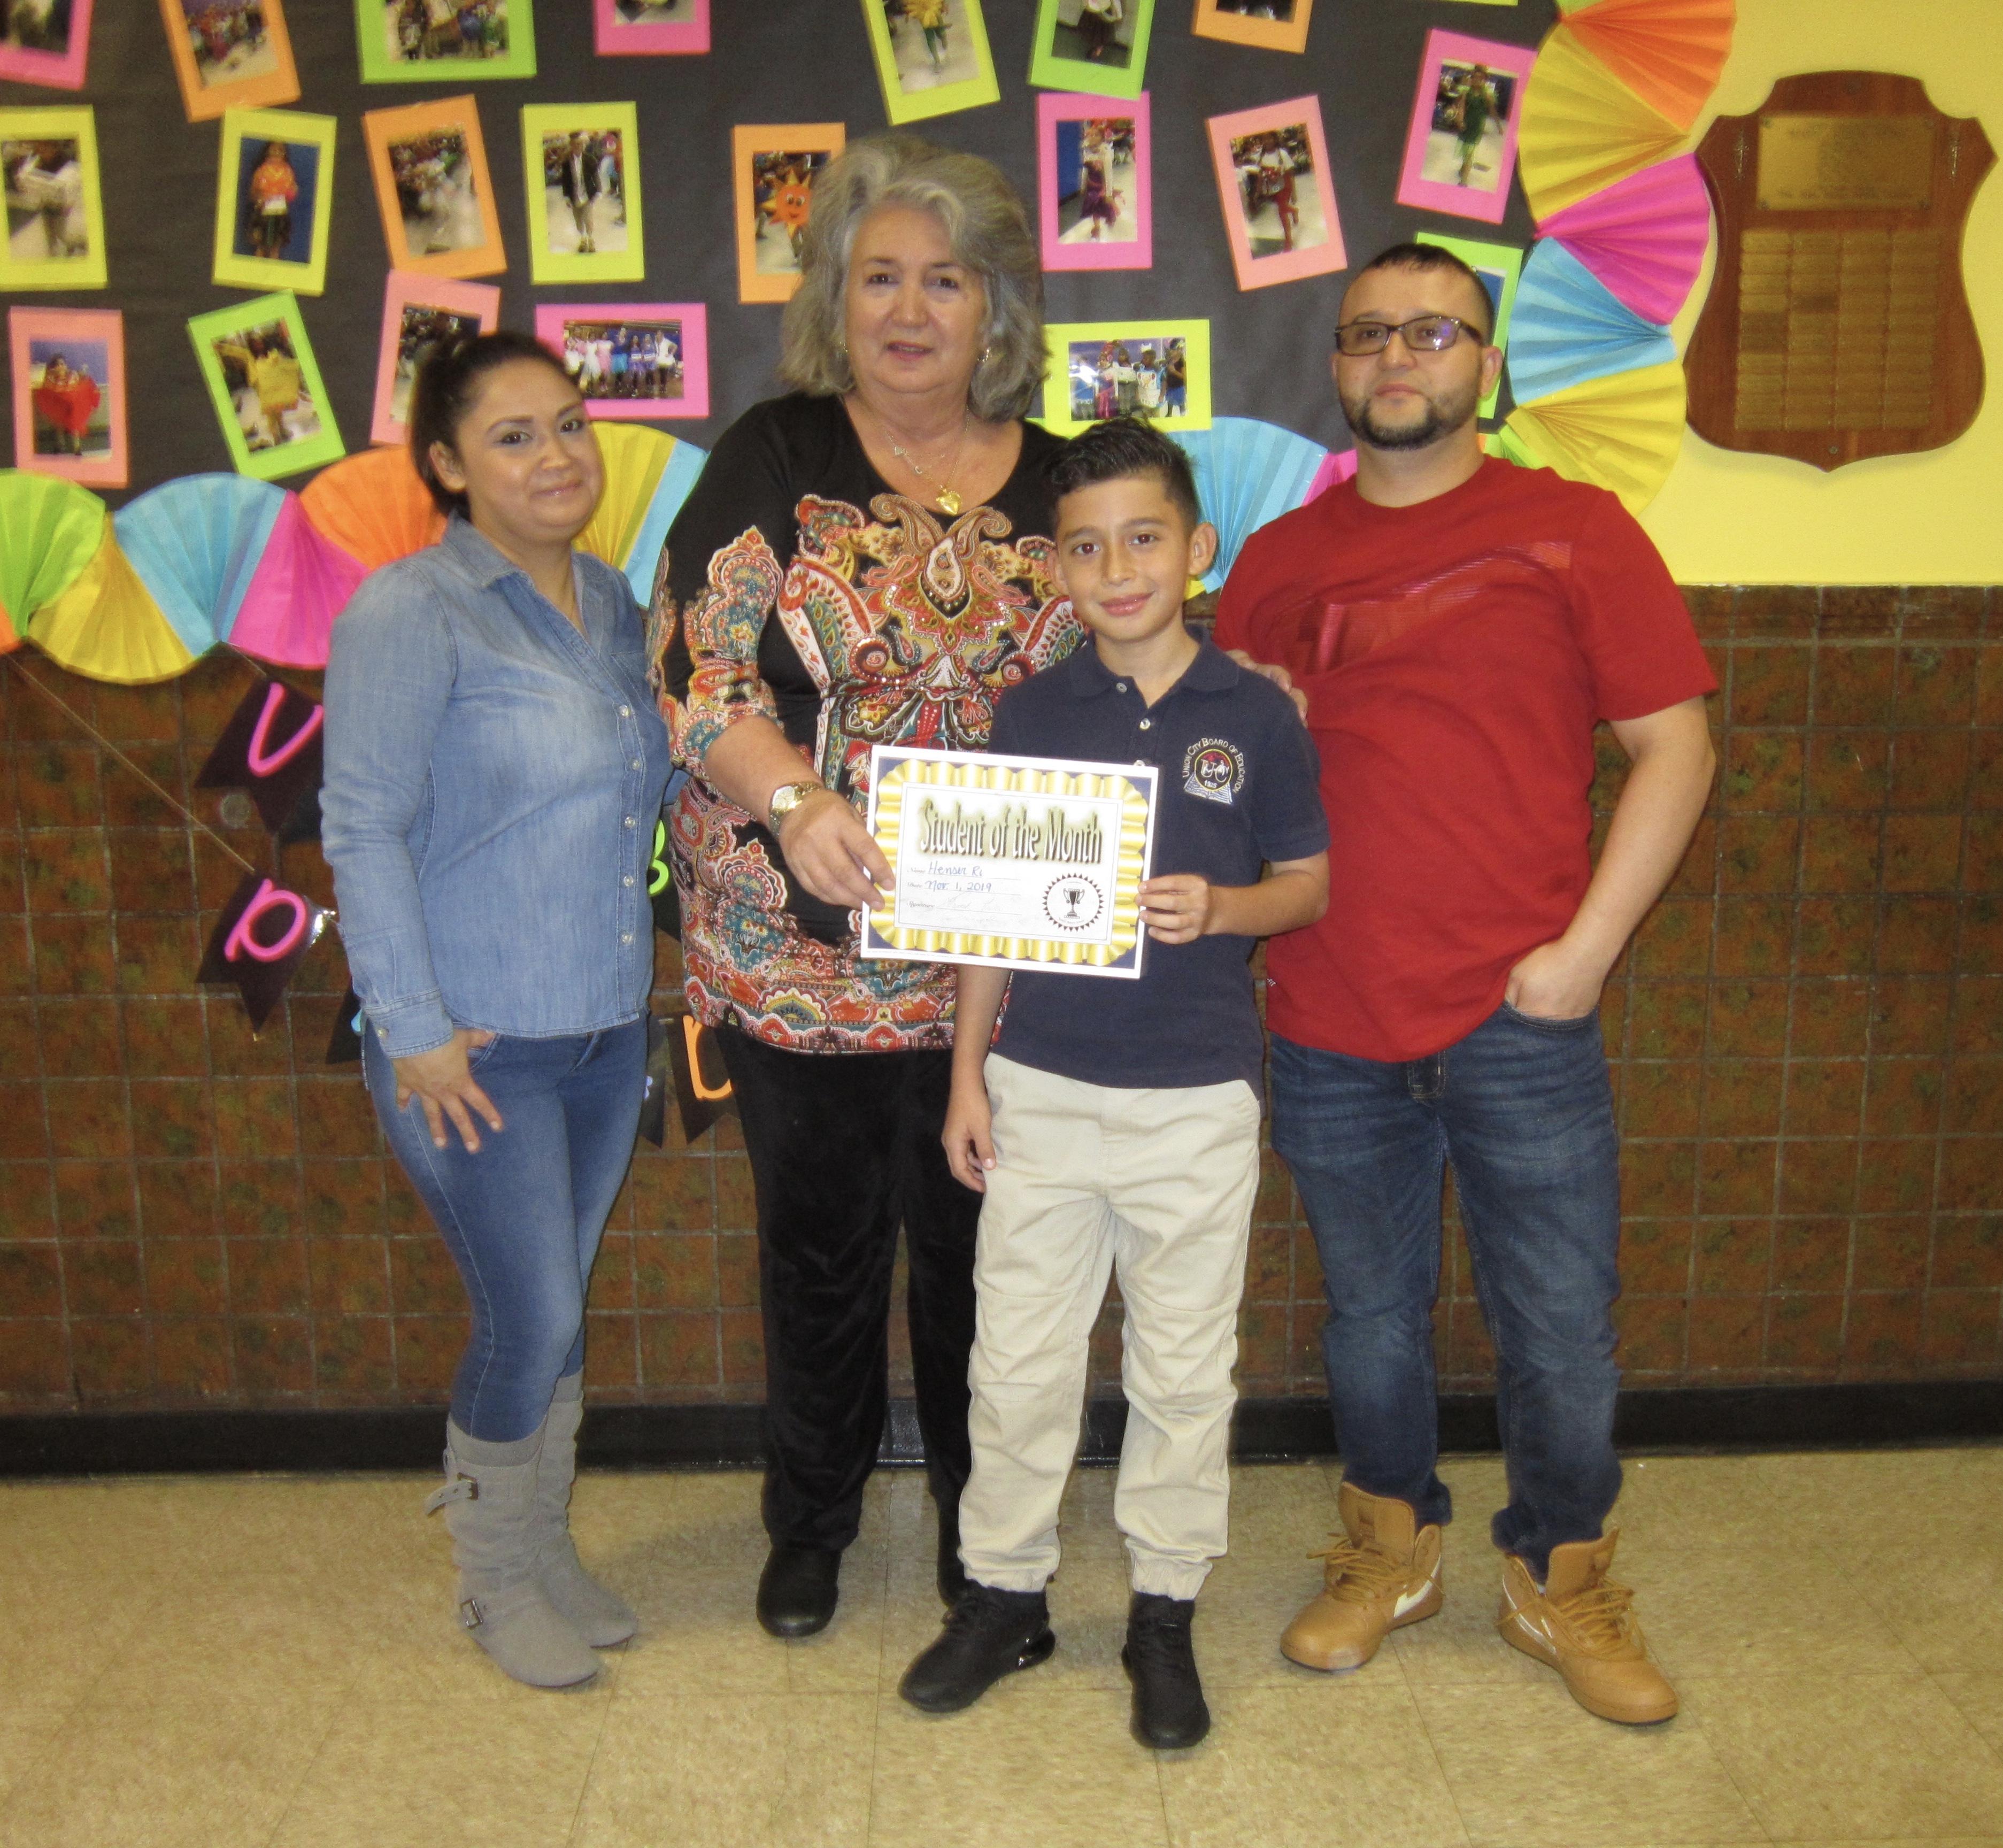 hanser R. his family and Principal Tierri receiving STudent of the month of nov. certificate